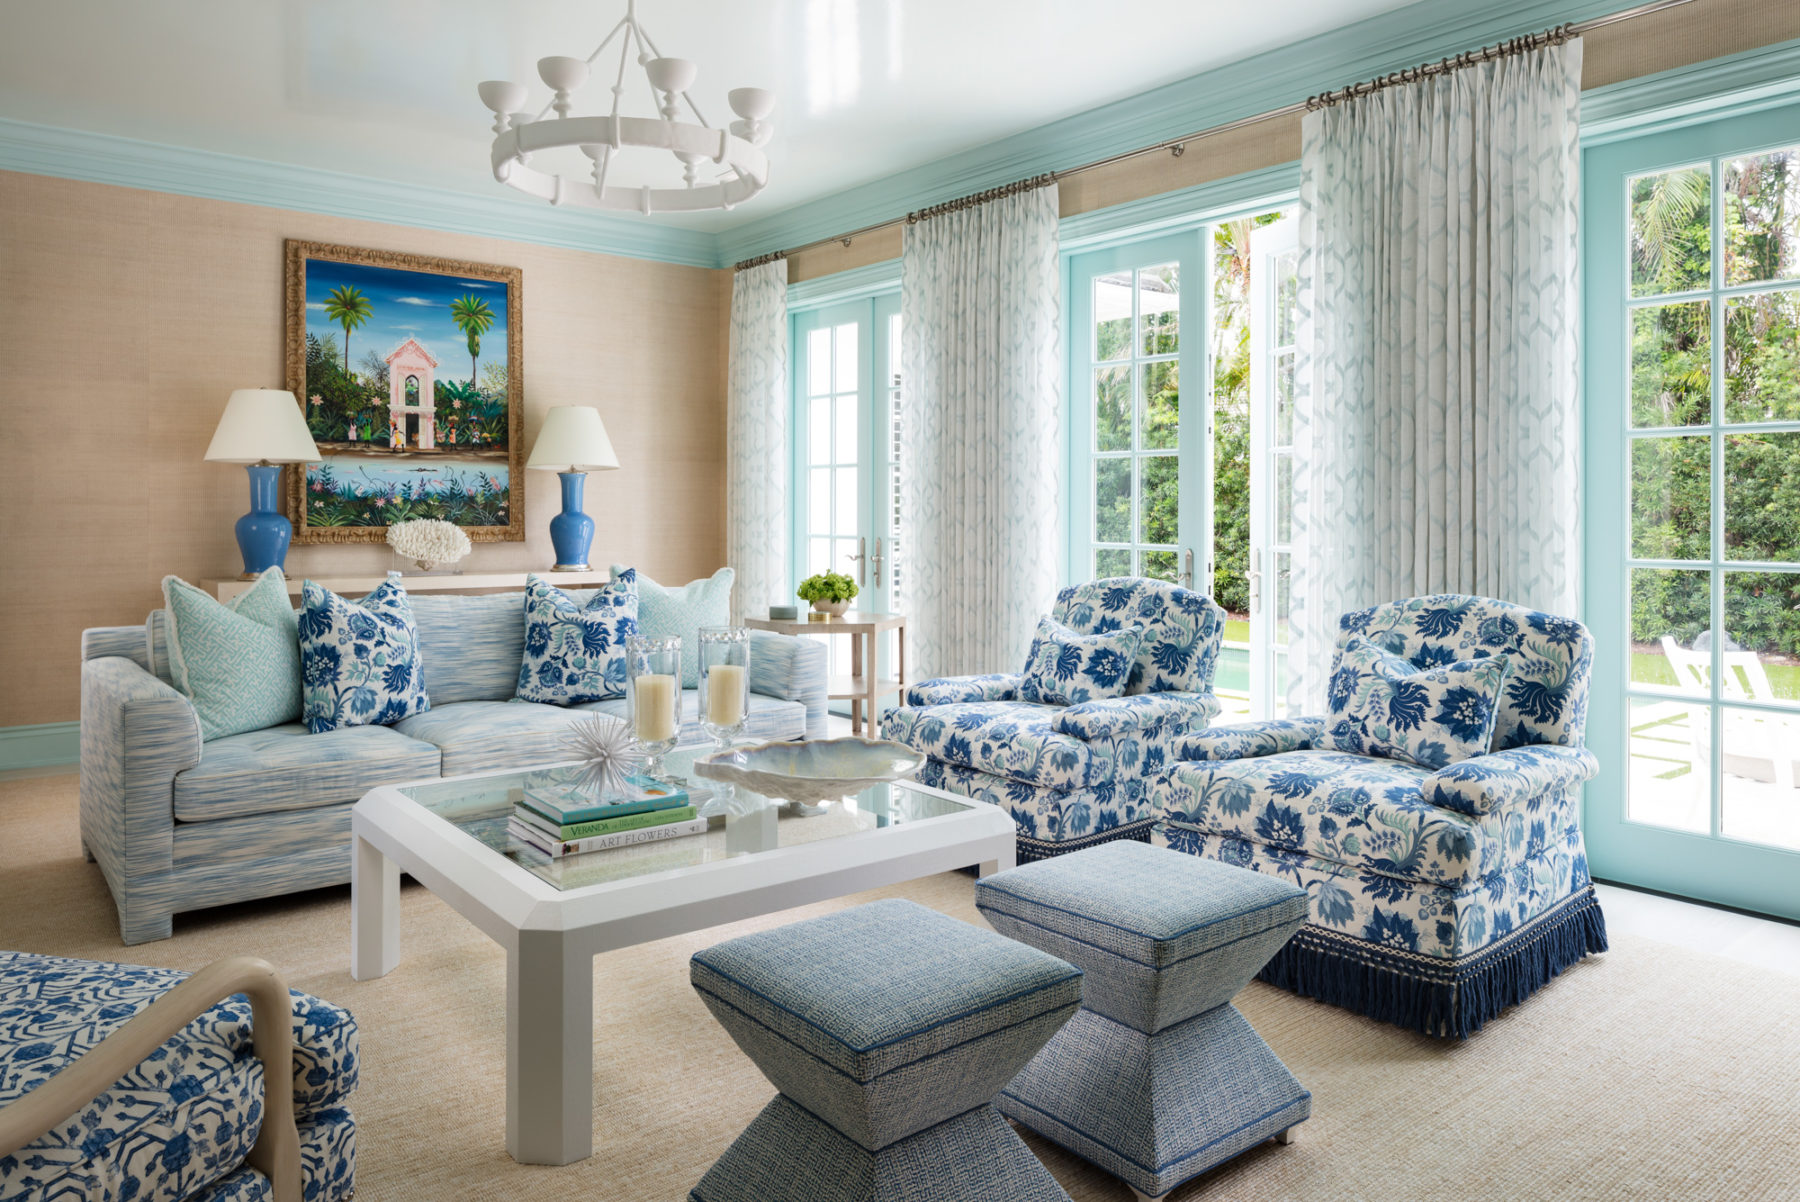 image of Seaside Vacation Home living room with neutral walls, blue trim, and blue patterned seating